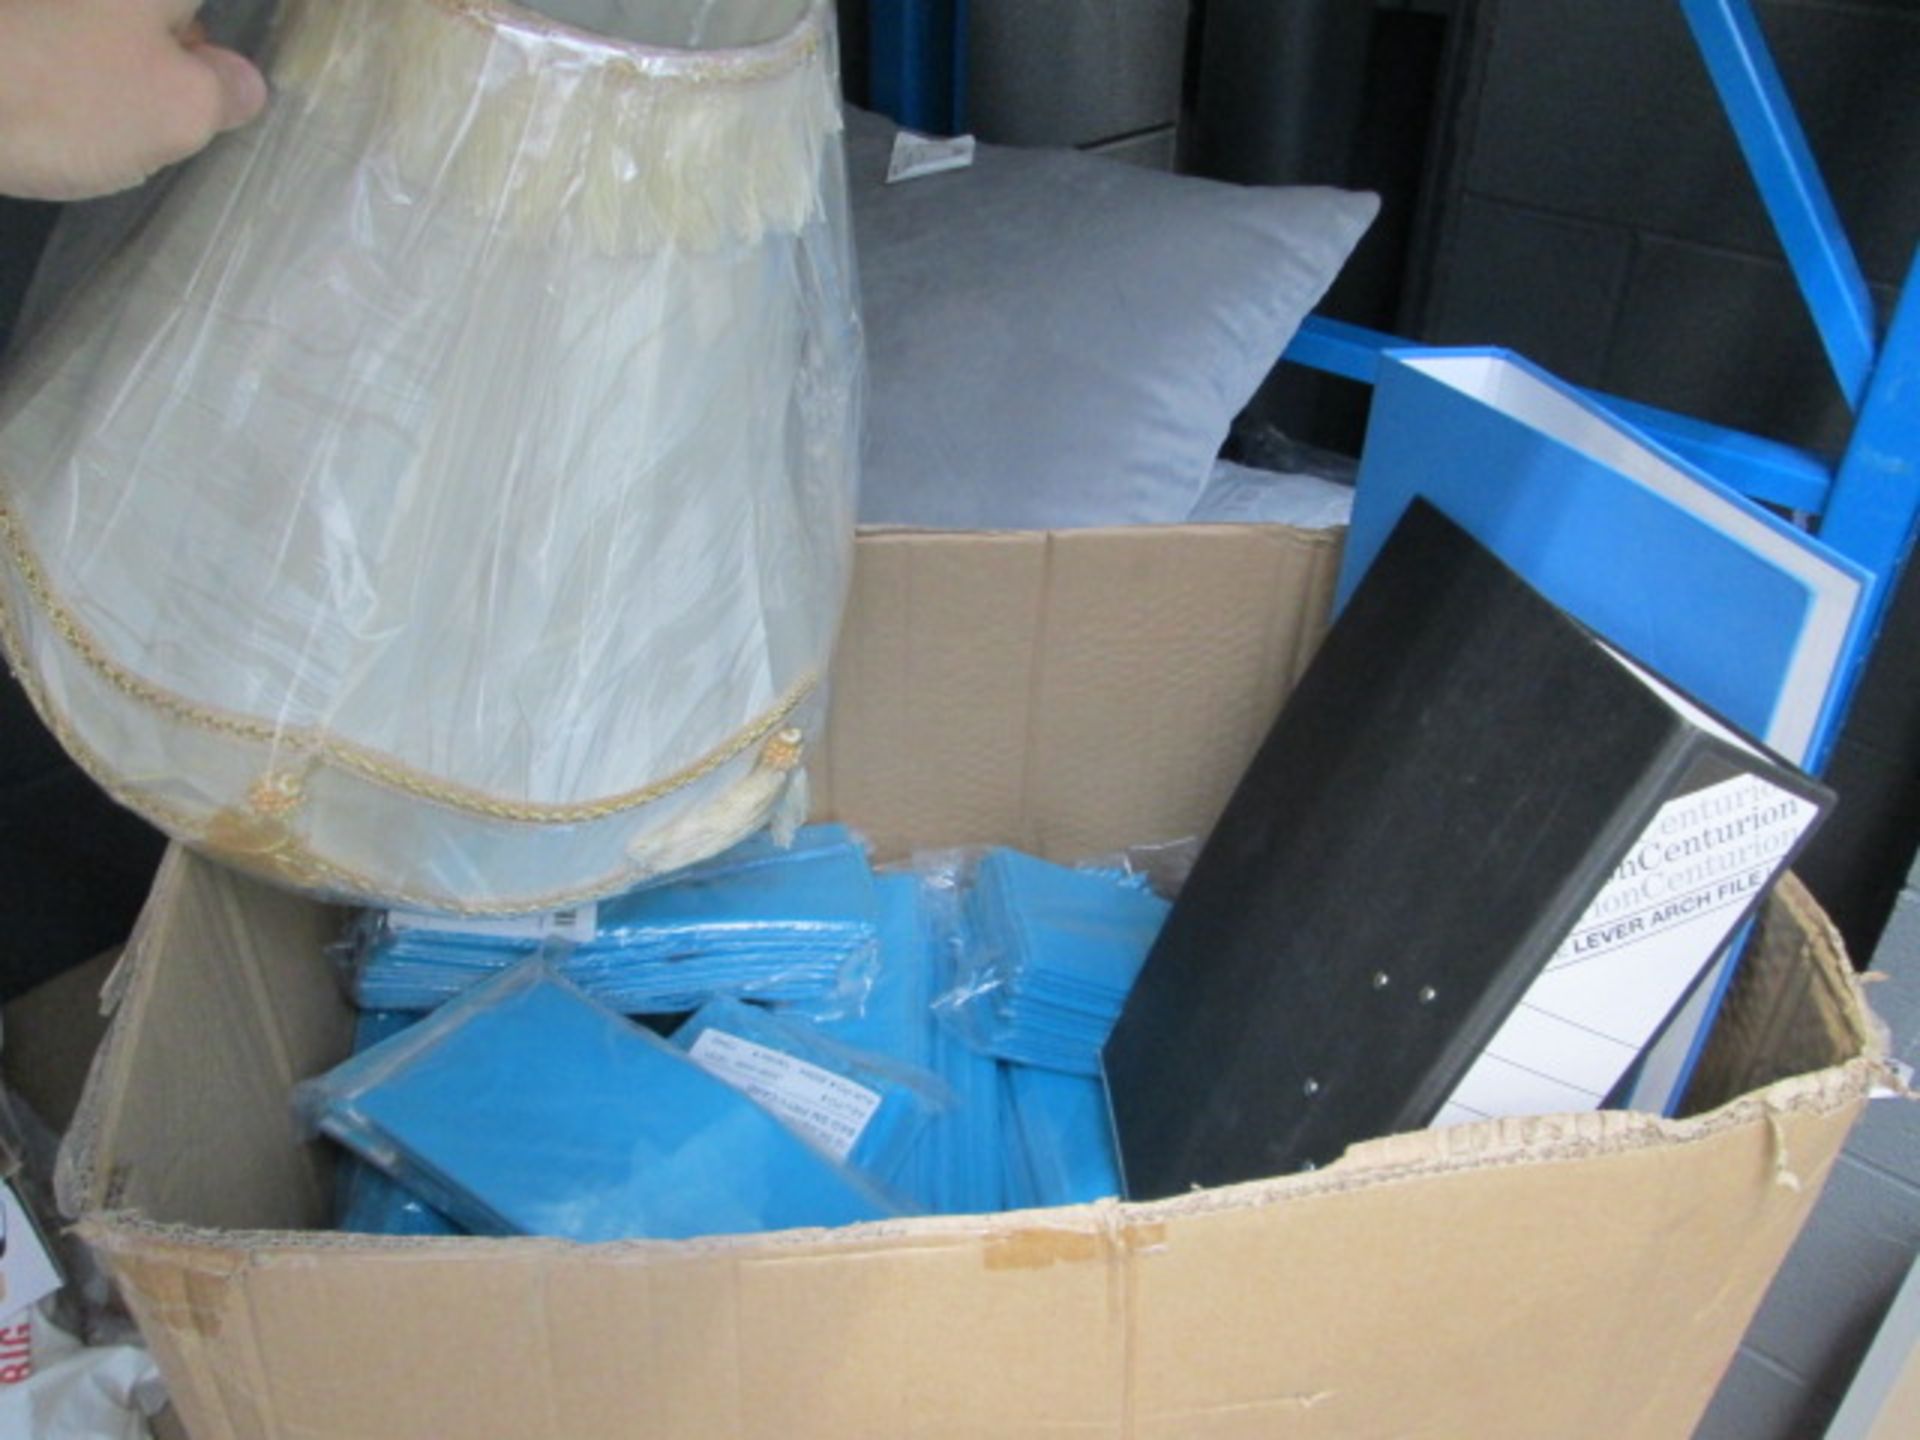 3448 A box of folders, lamp shade and blue party bags